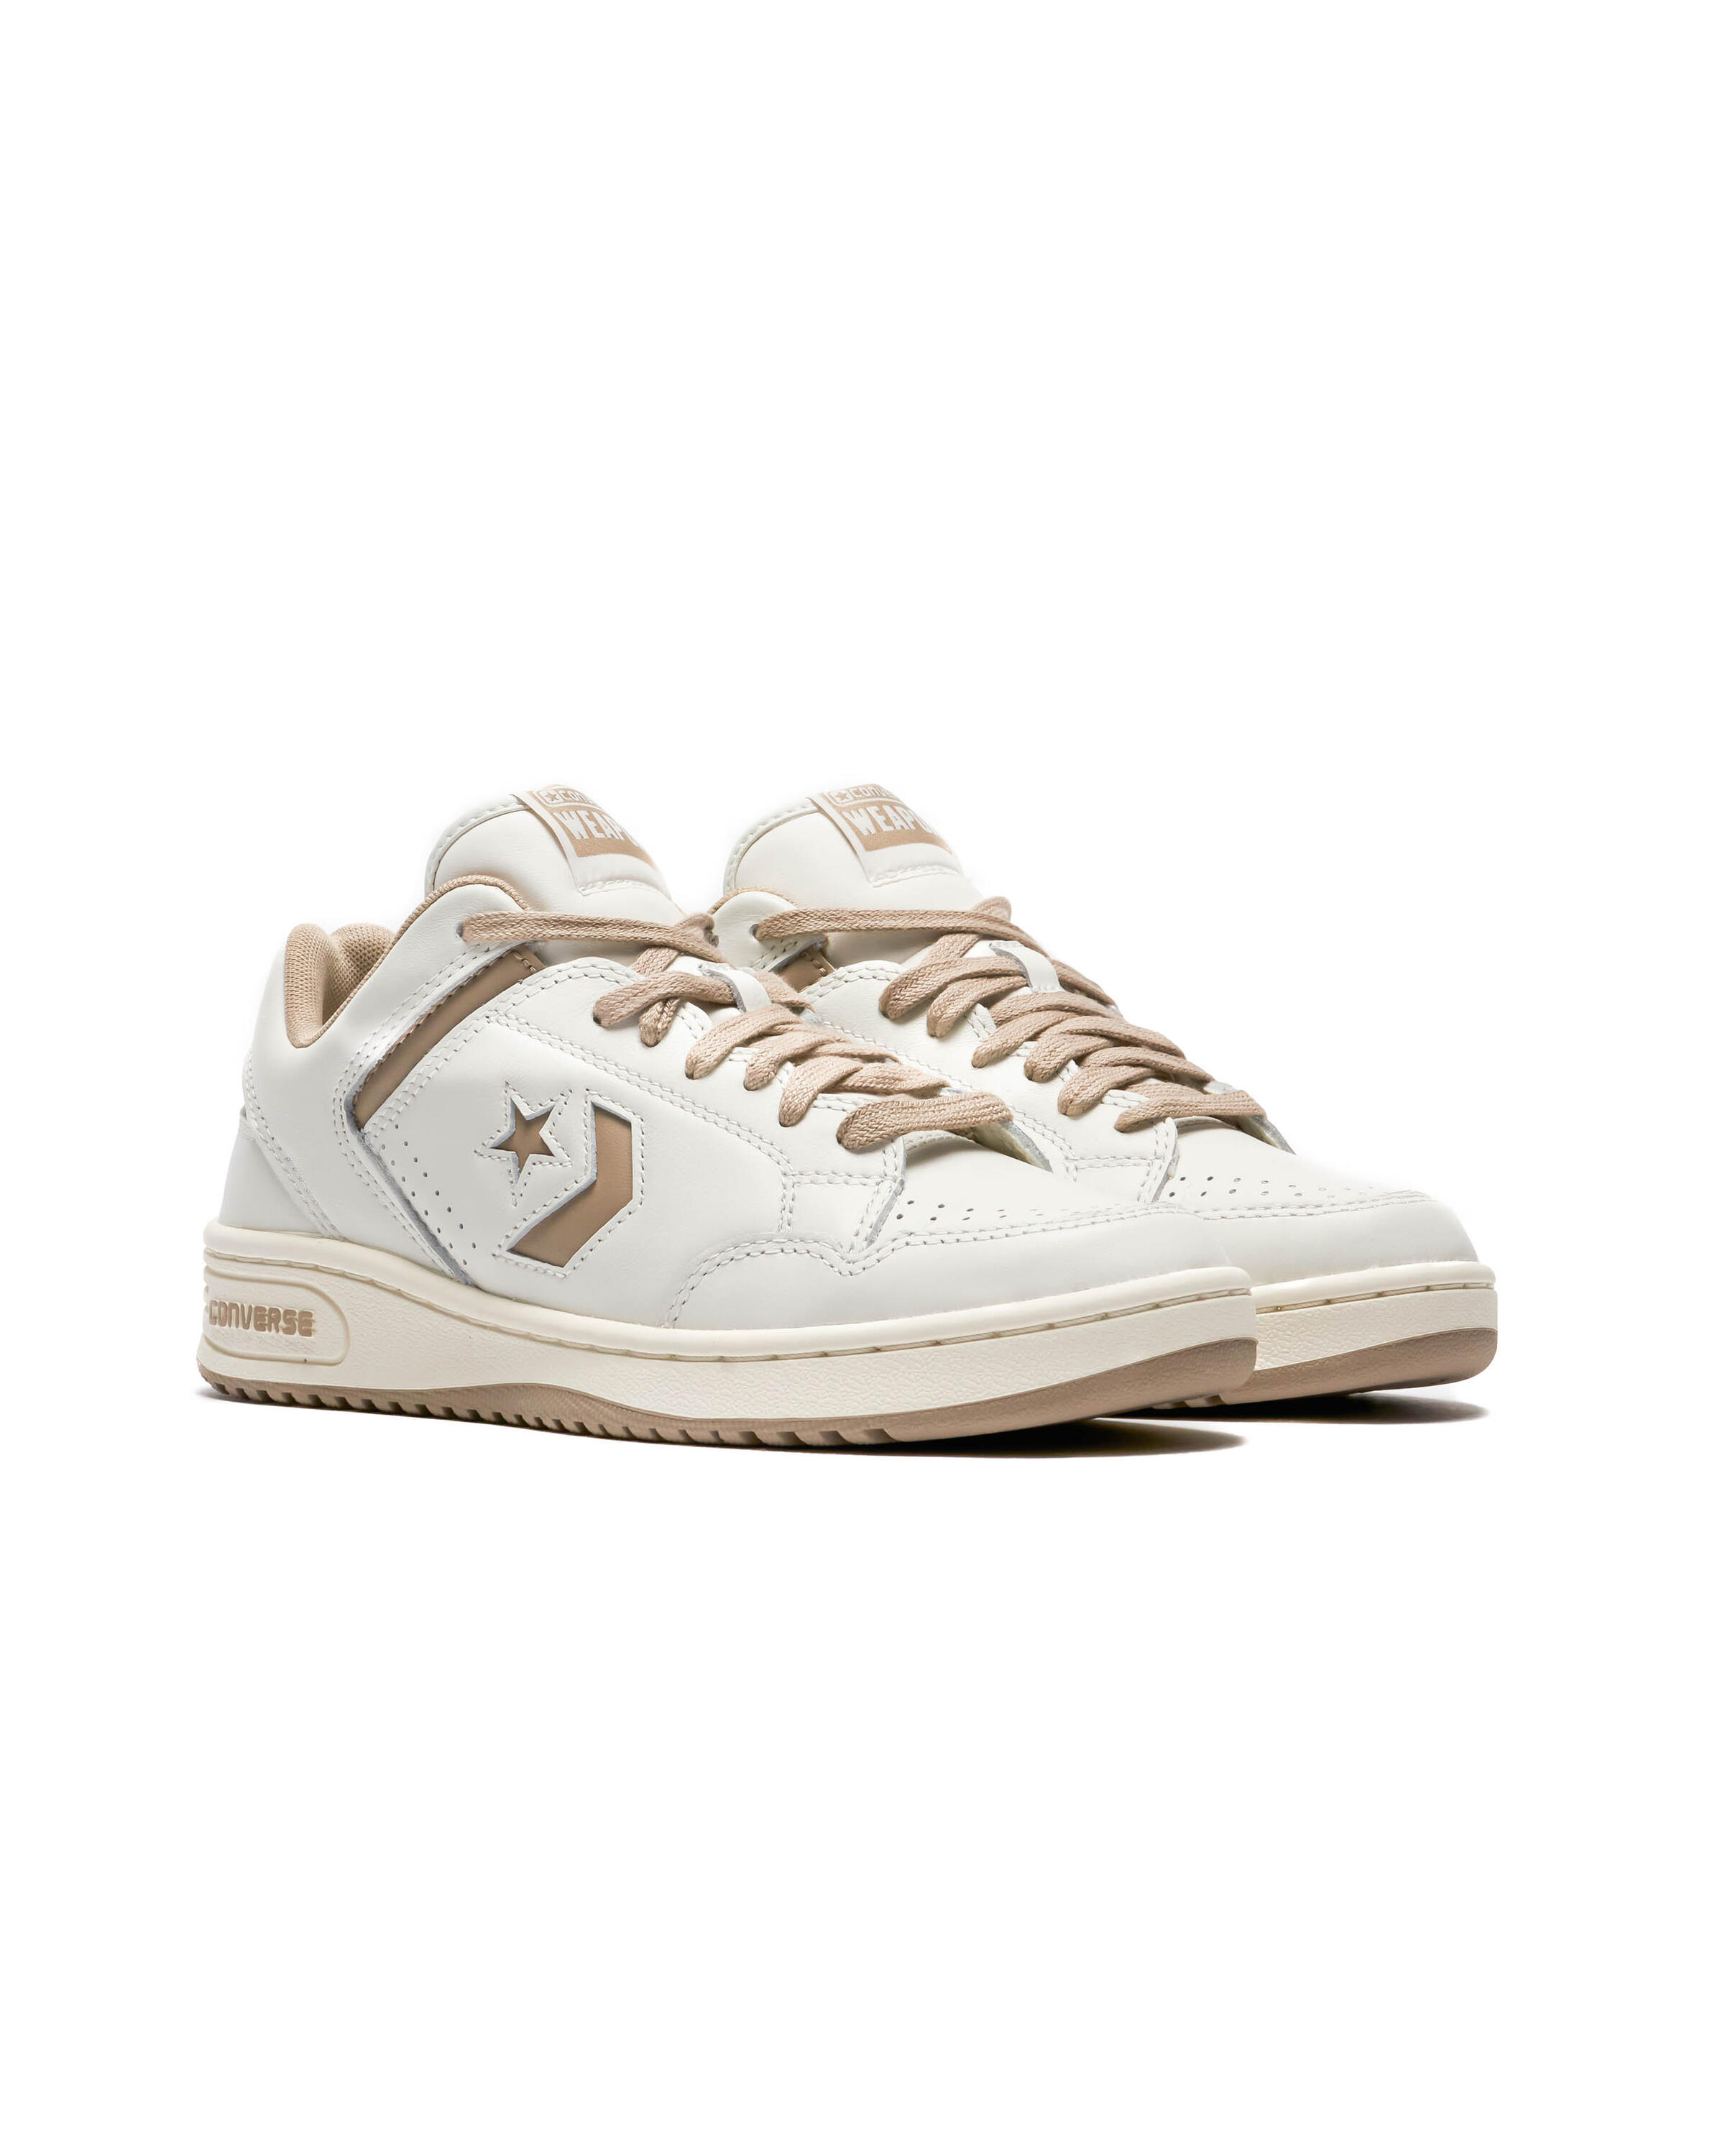 Converse x OLD MONEY WEAPON OX